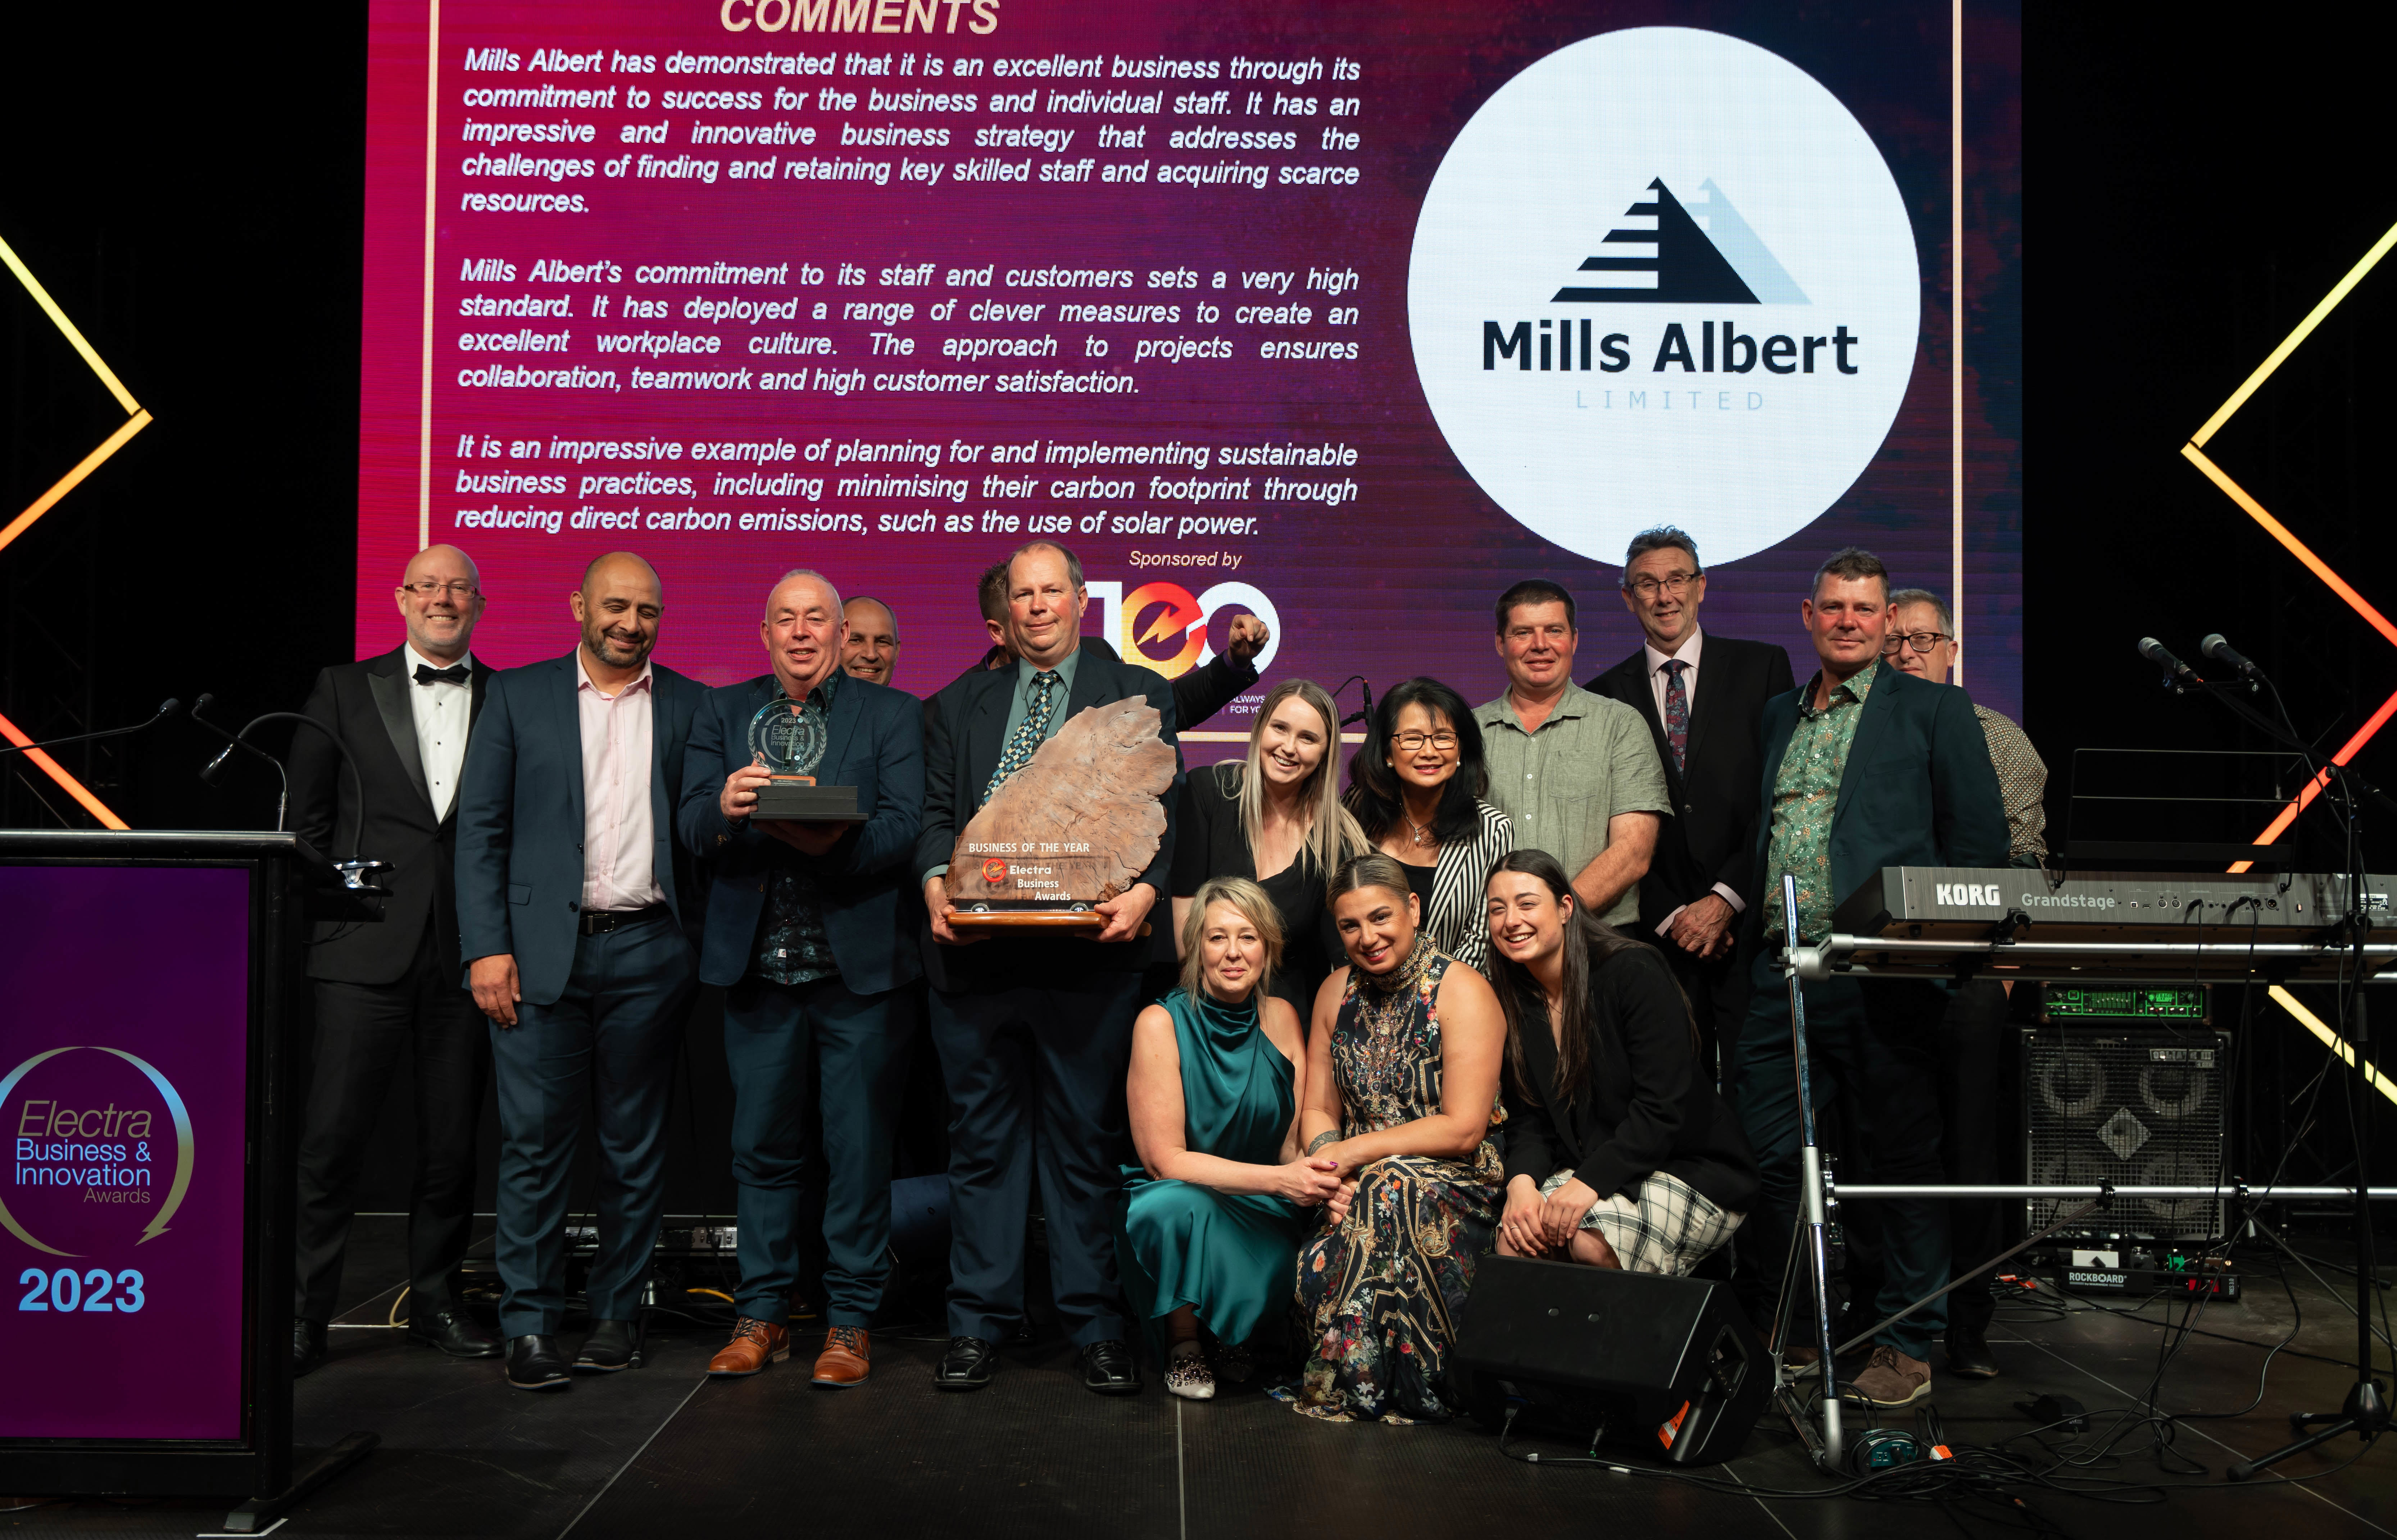 The Mills Albert Team being presented the Electra Business and Innovation Award for 2023